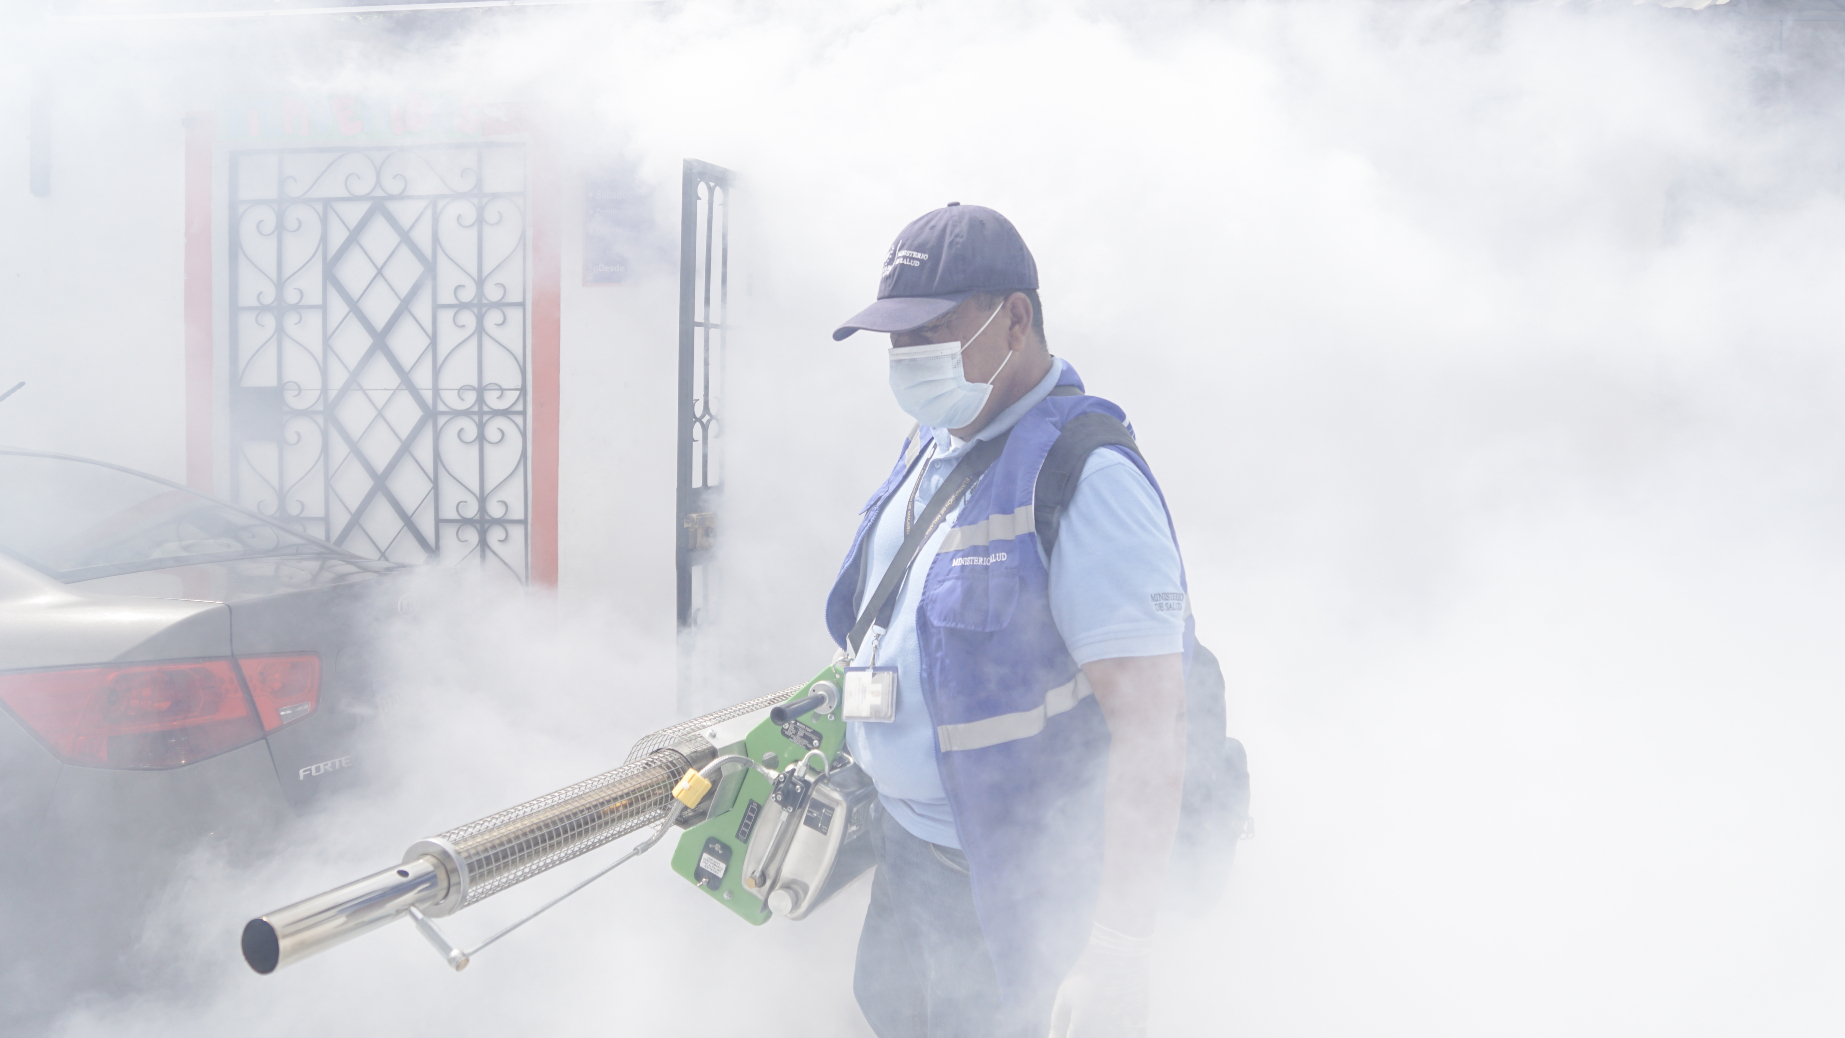 A municipal worker sprays chemicals against mosquitoes that spread illnesses, including zika virus